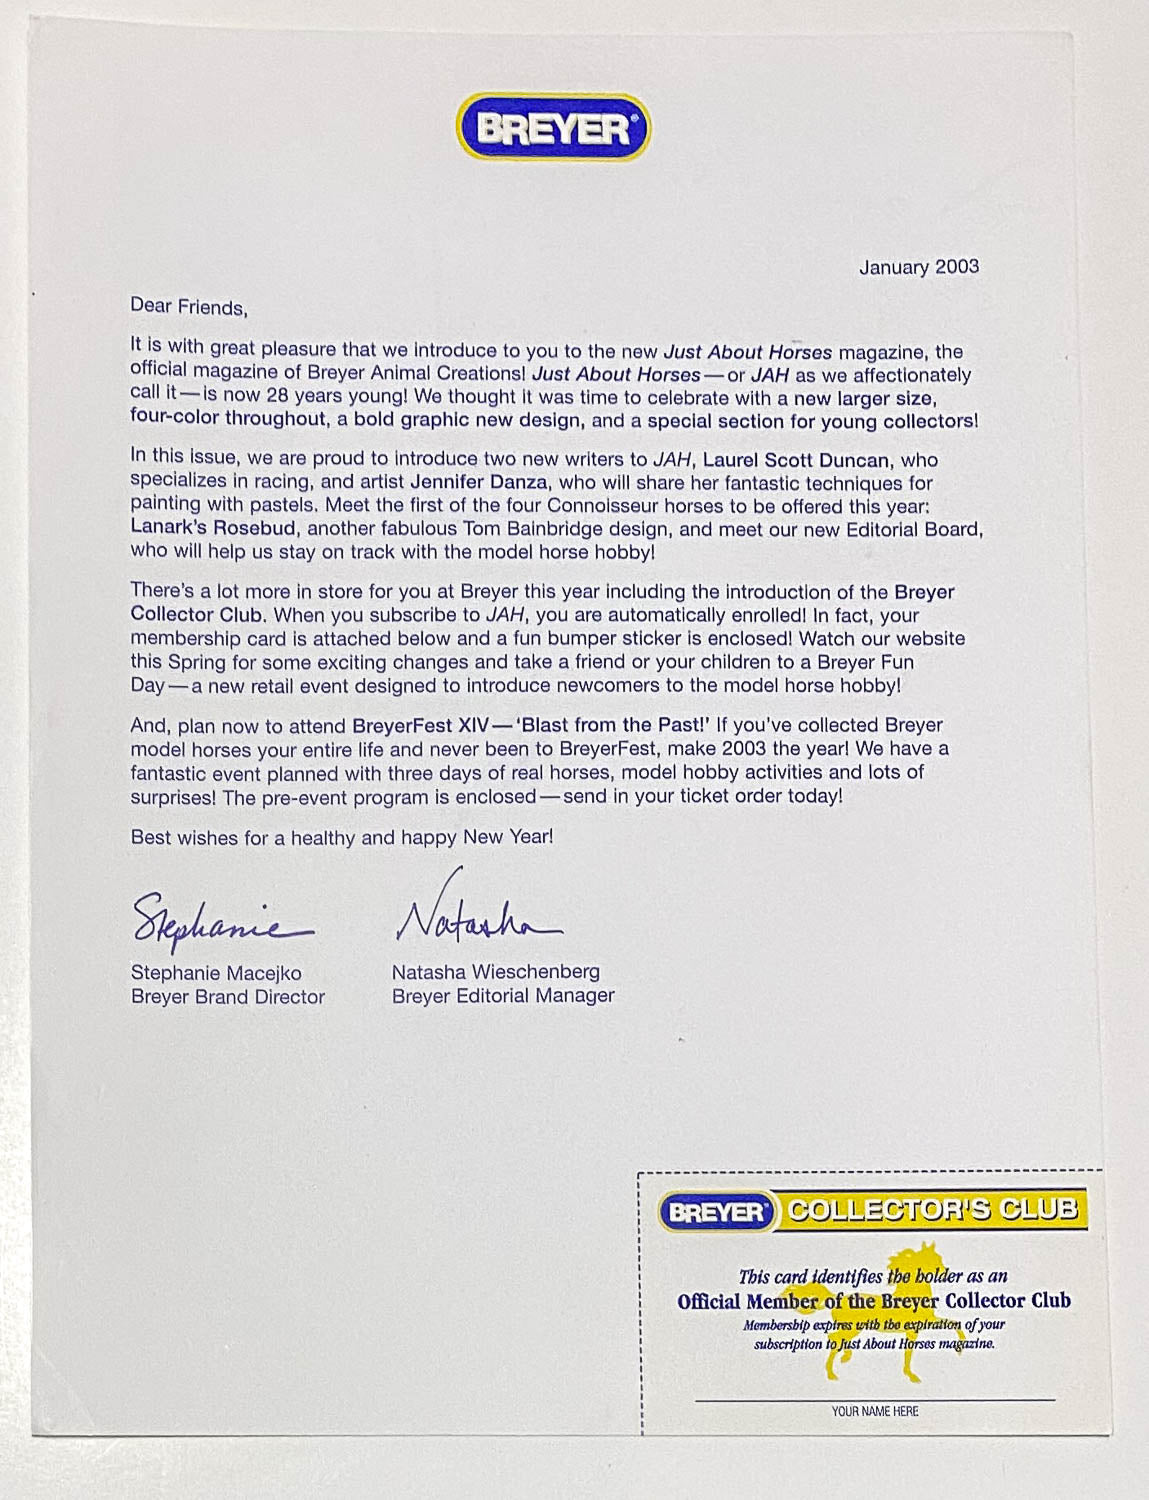 Collectors Club Card and Welcome Letter, 2003 (sale for charity)